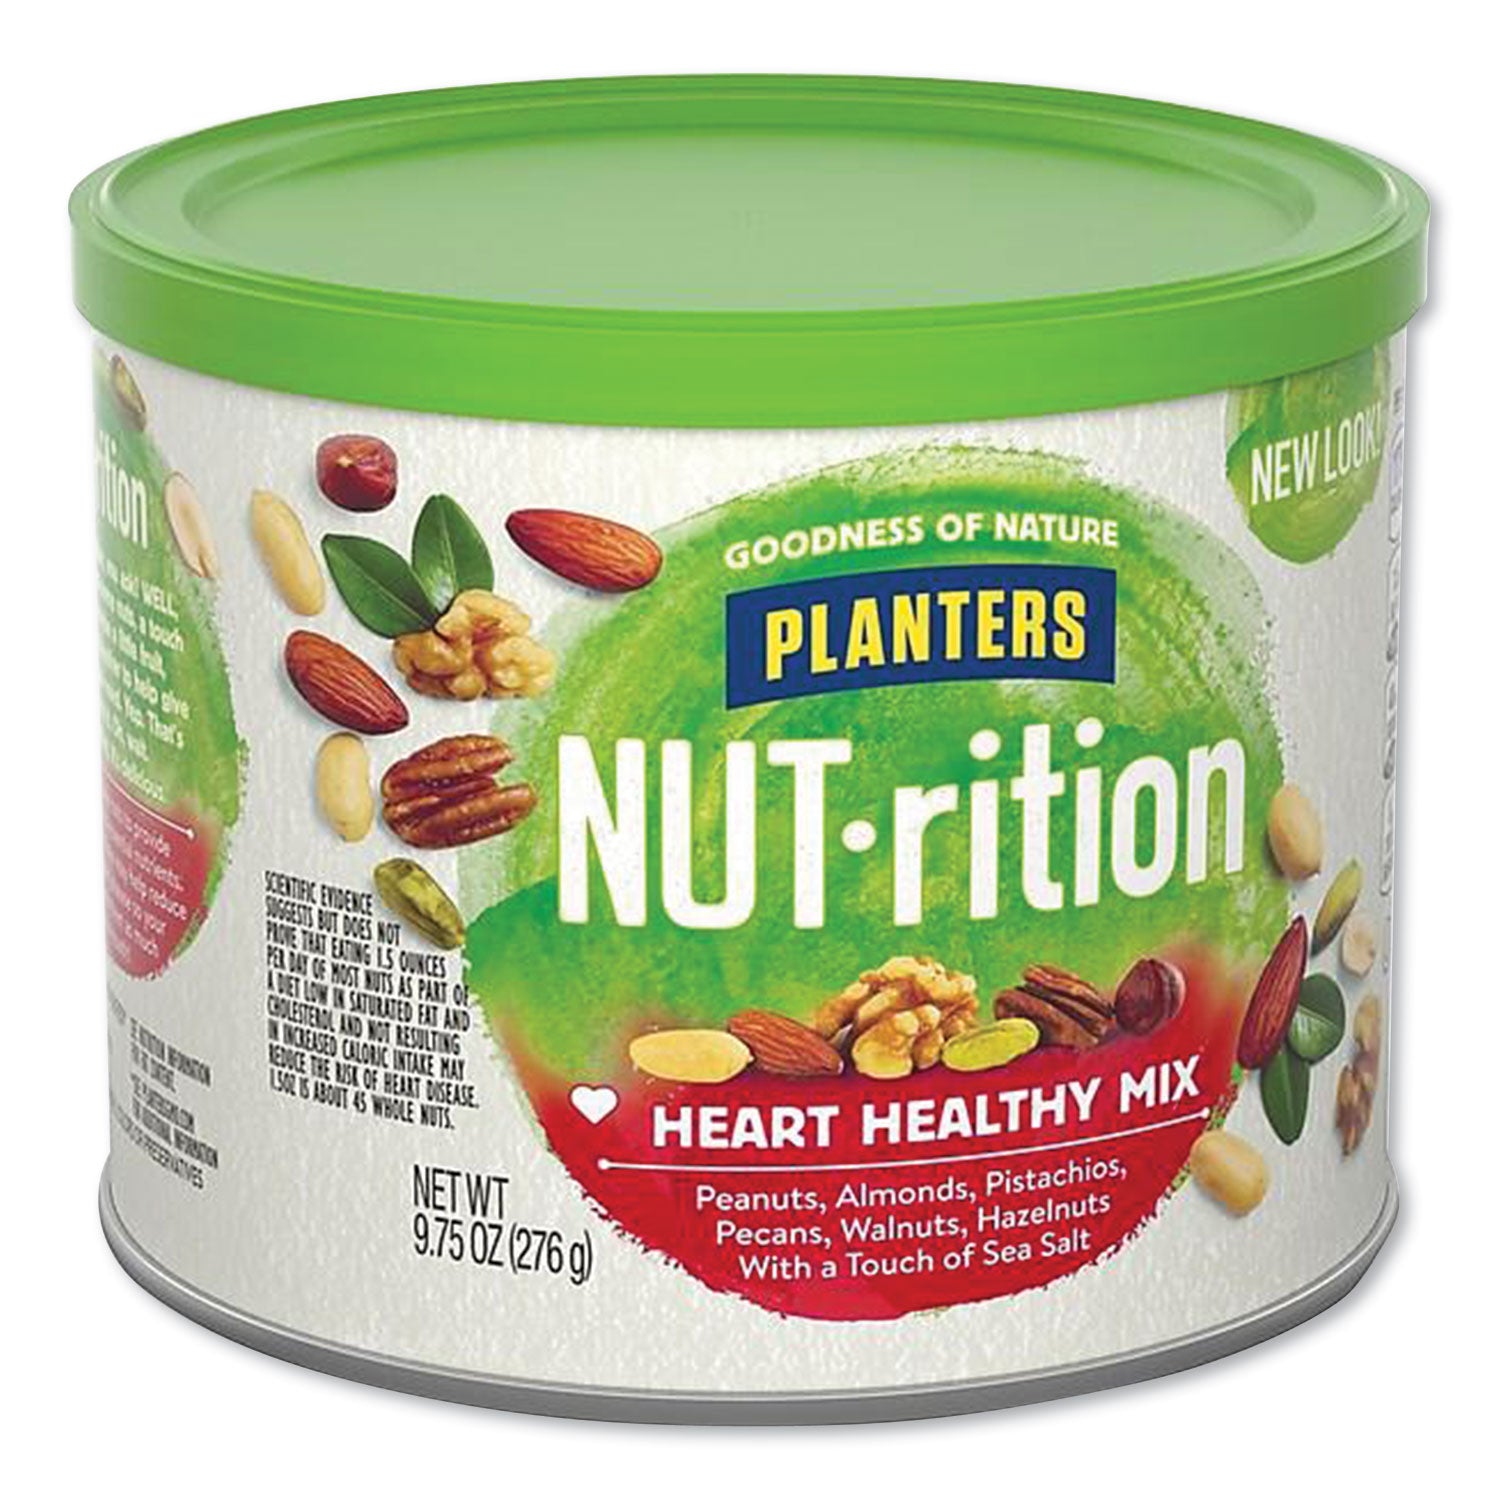 nut-rition-heart-healthy-mix-975-oz-can_ptn05957 - 3